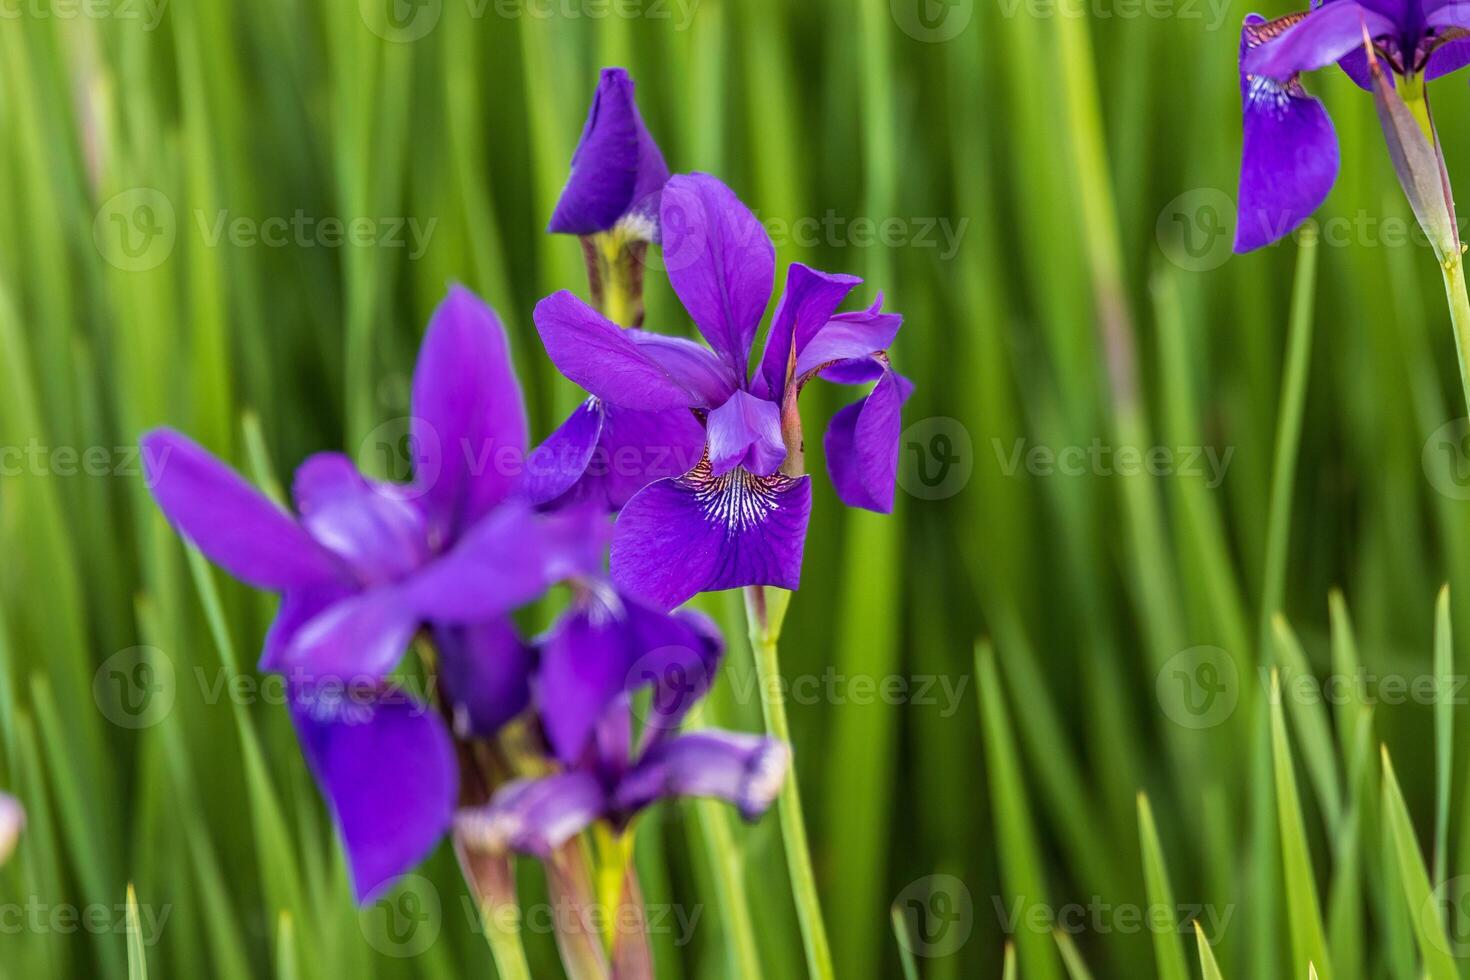 number of Japanese Iris blooms in the garden photo